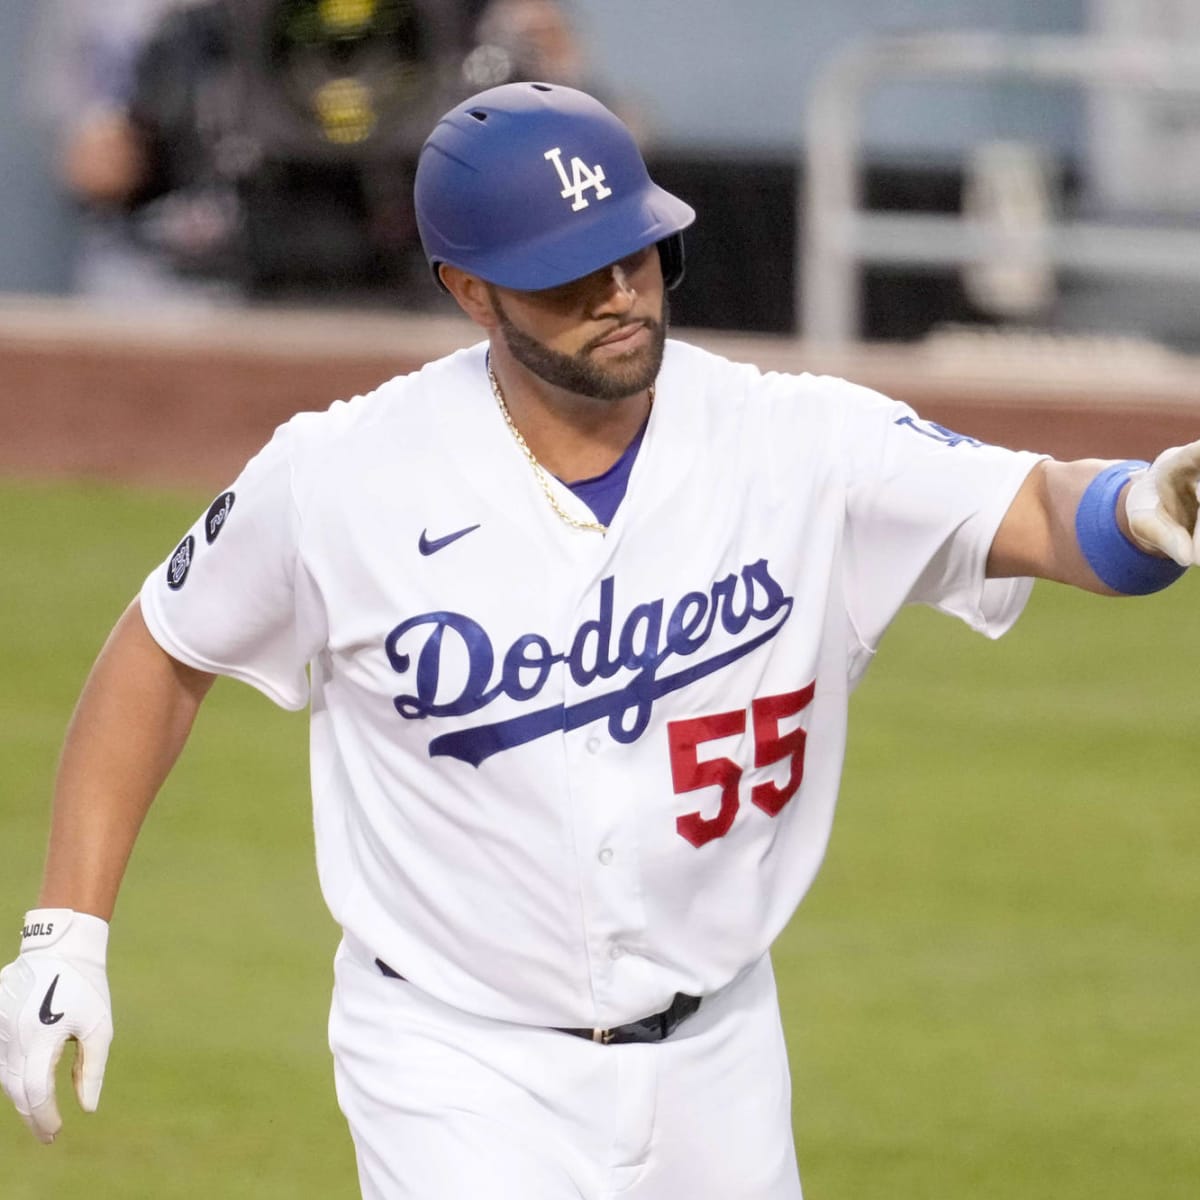 Tío Albert Pujols homers in the 1st to make it 2-0 #Dodgers!